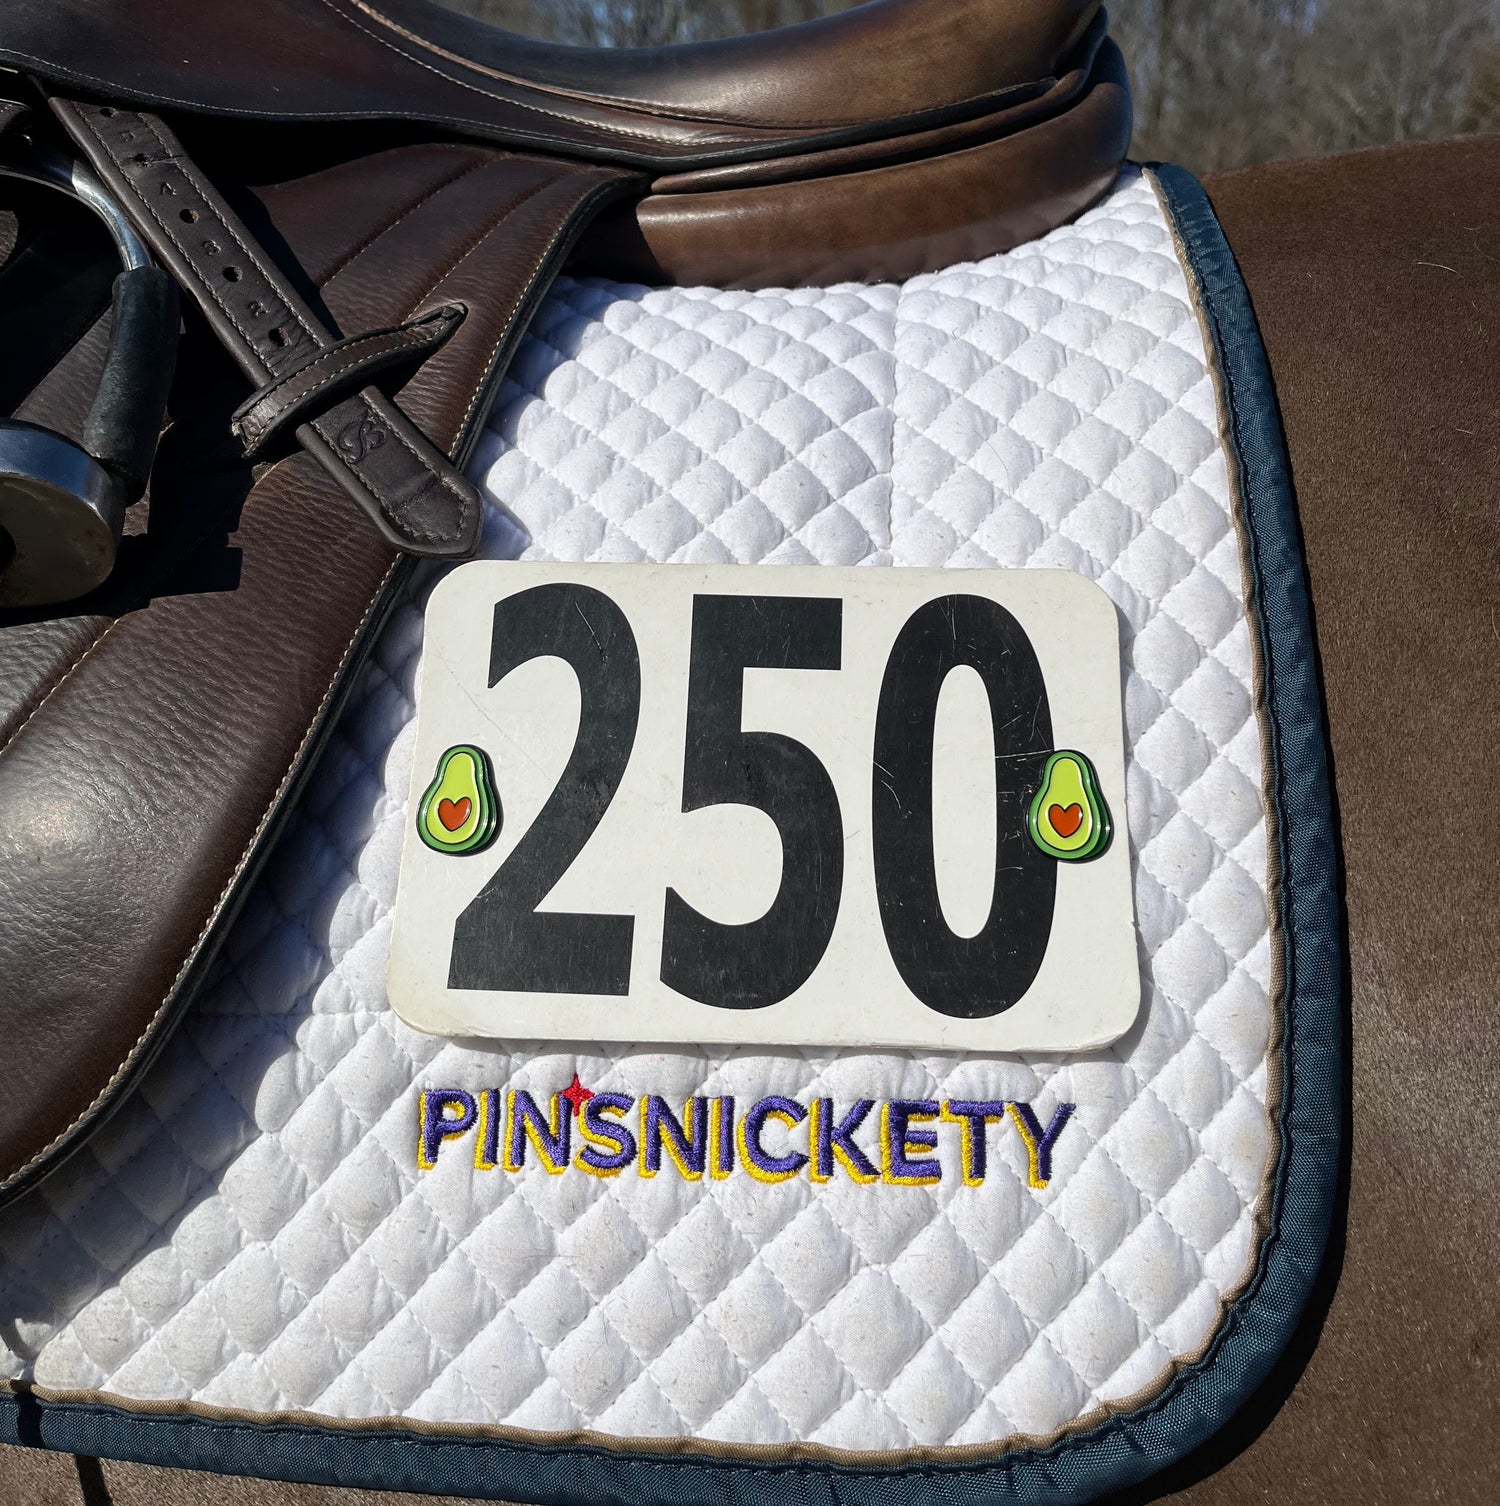 pinsnickety avocado horse show number pins on a saddle pad